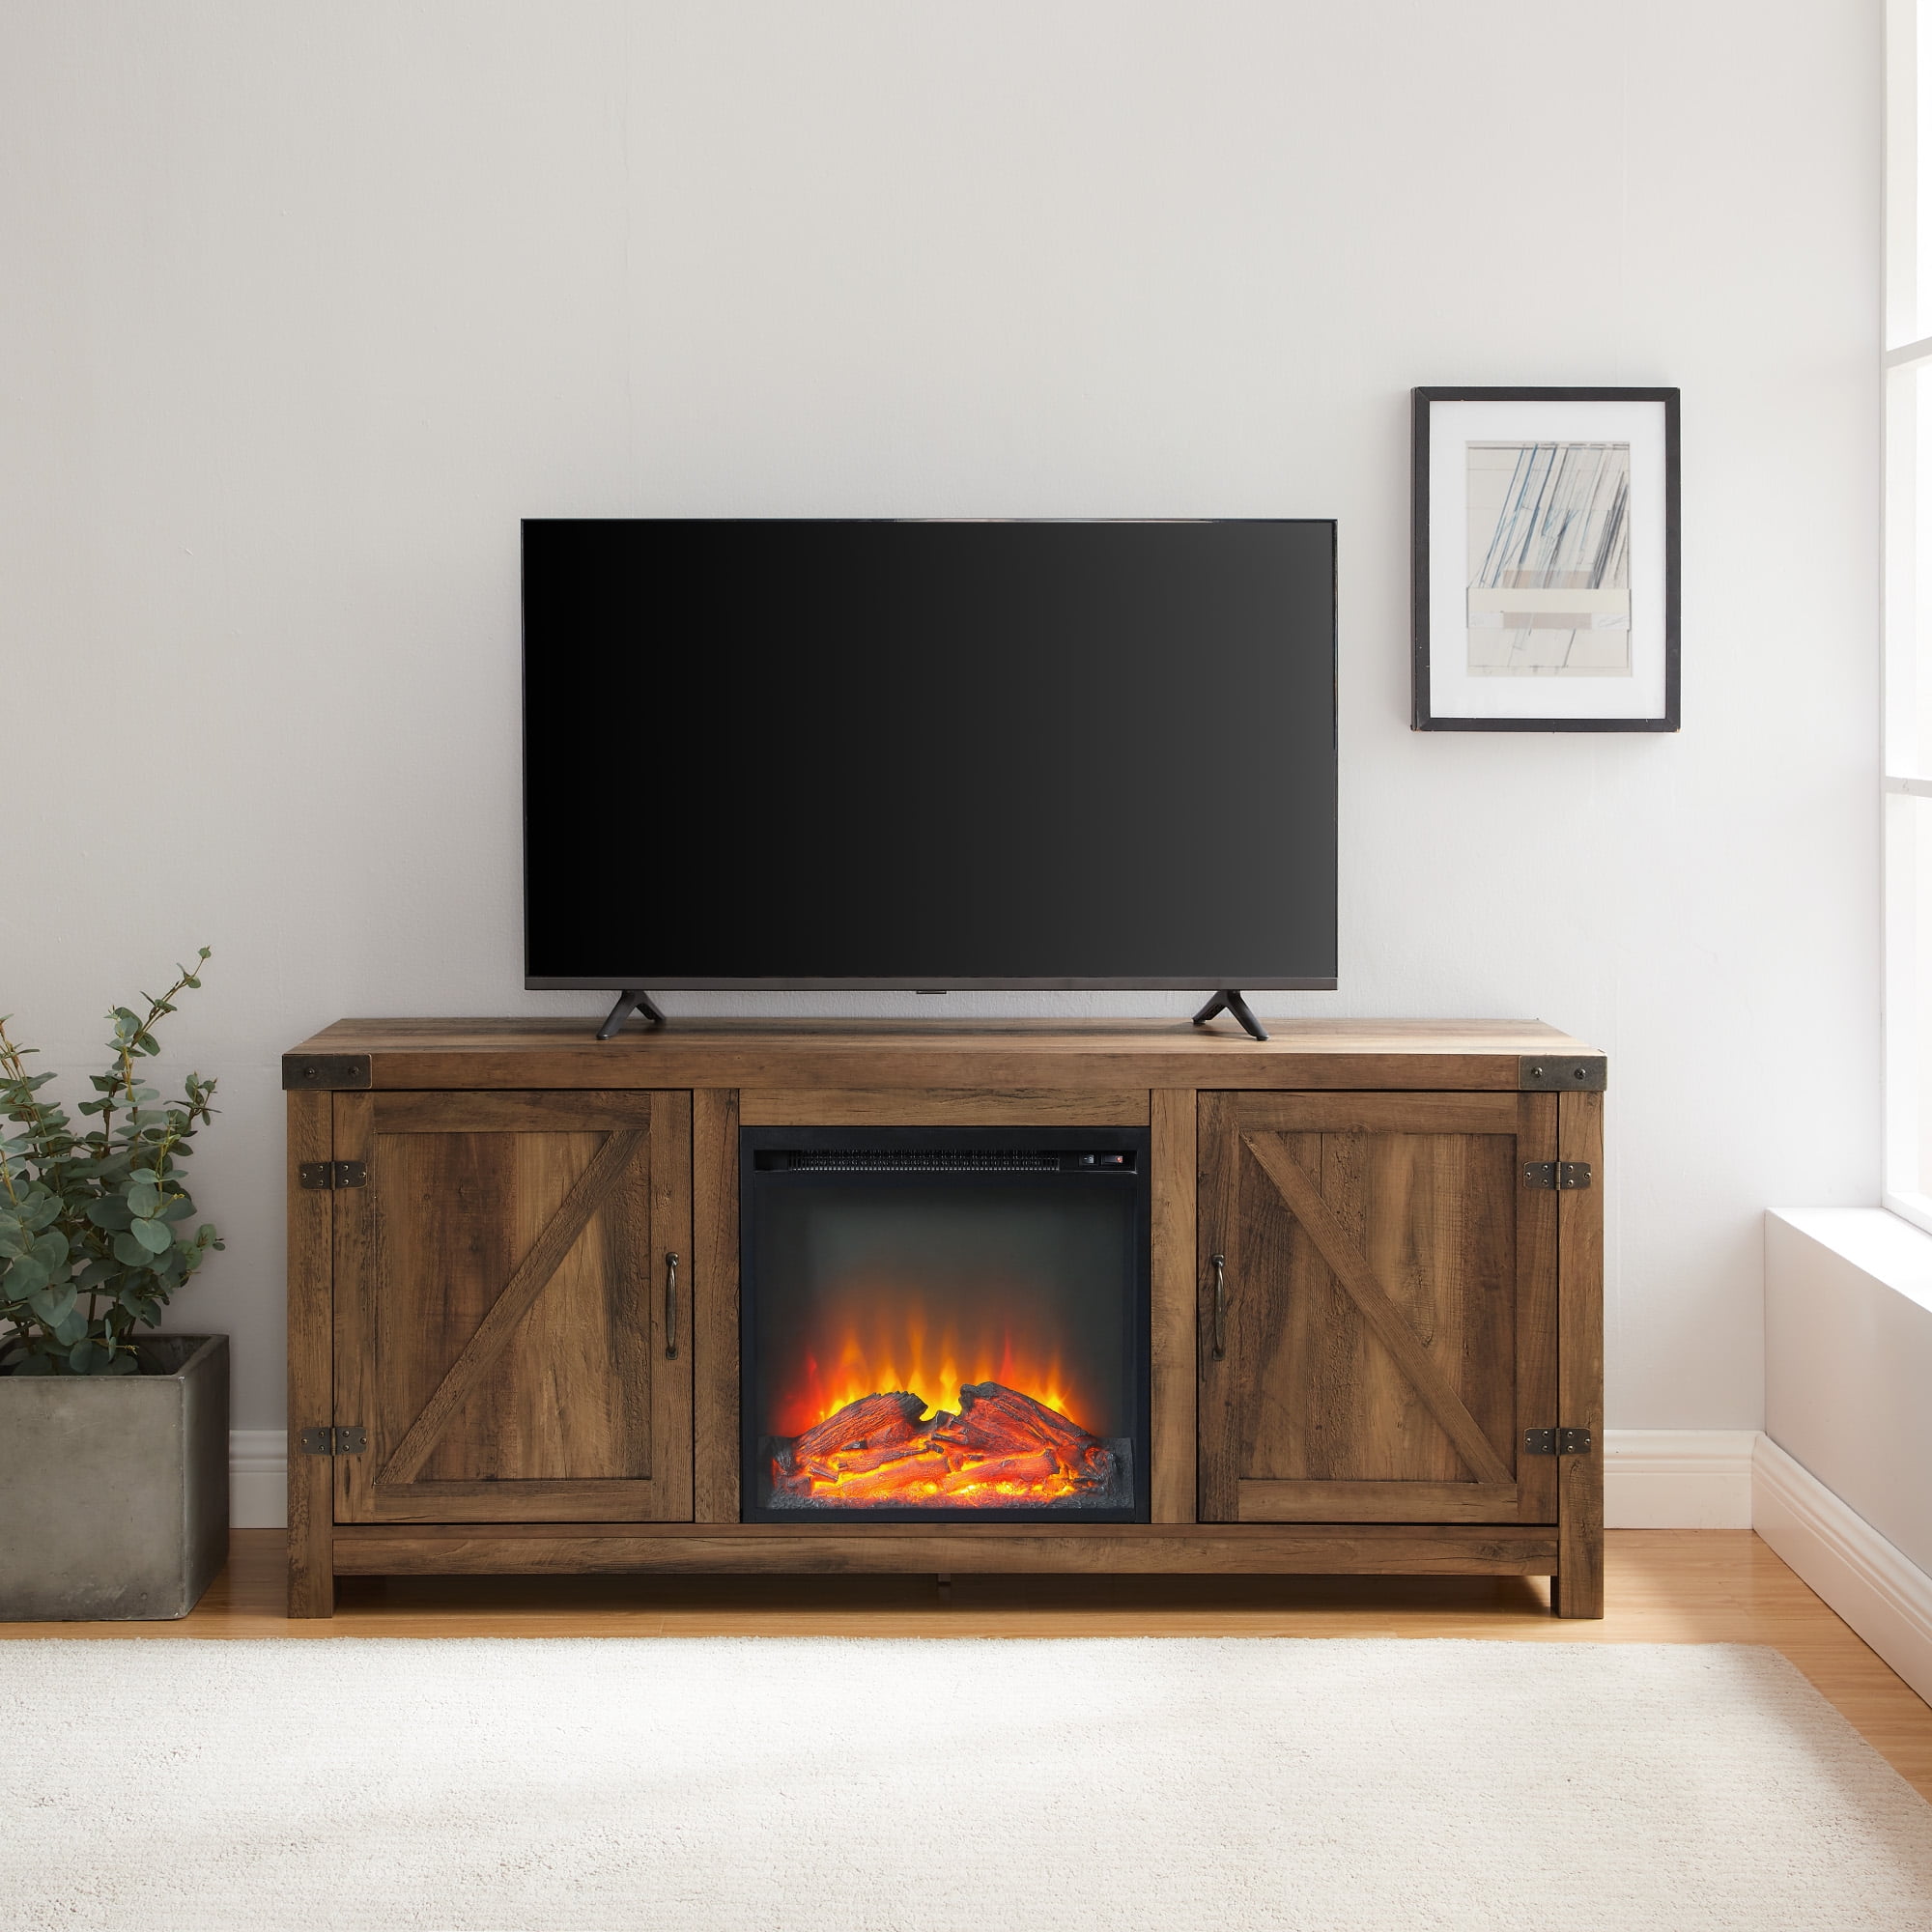 Details about   Electric Fireplace Tv Stand 65 inch Home Entertainment Center Media Storage Wood 